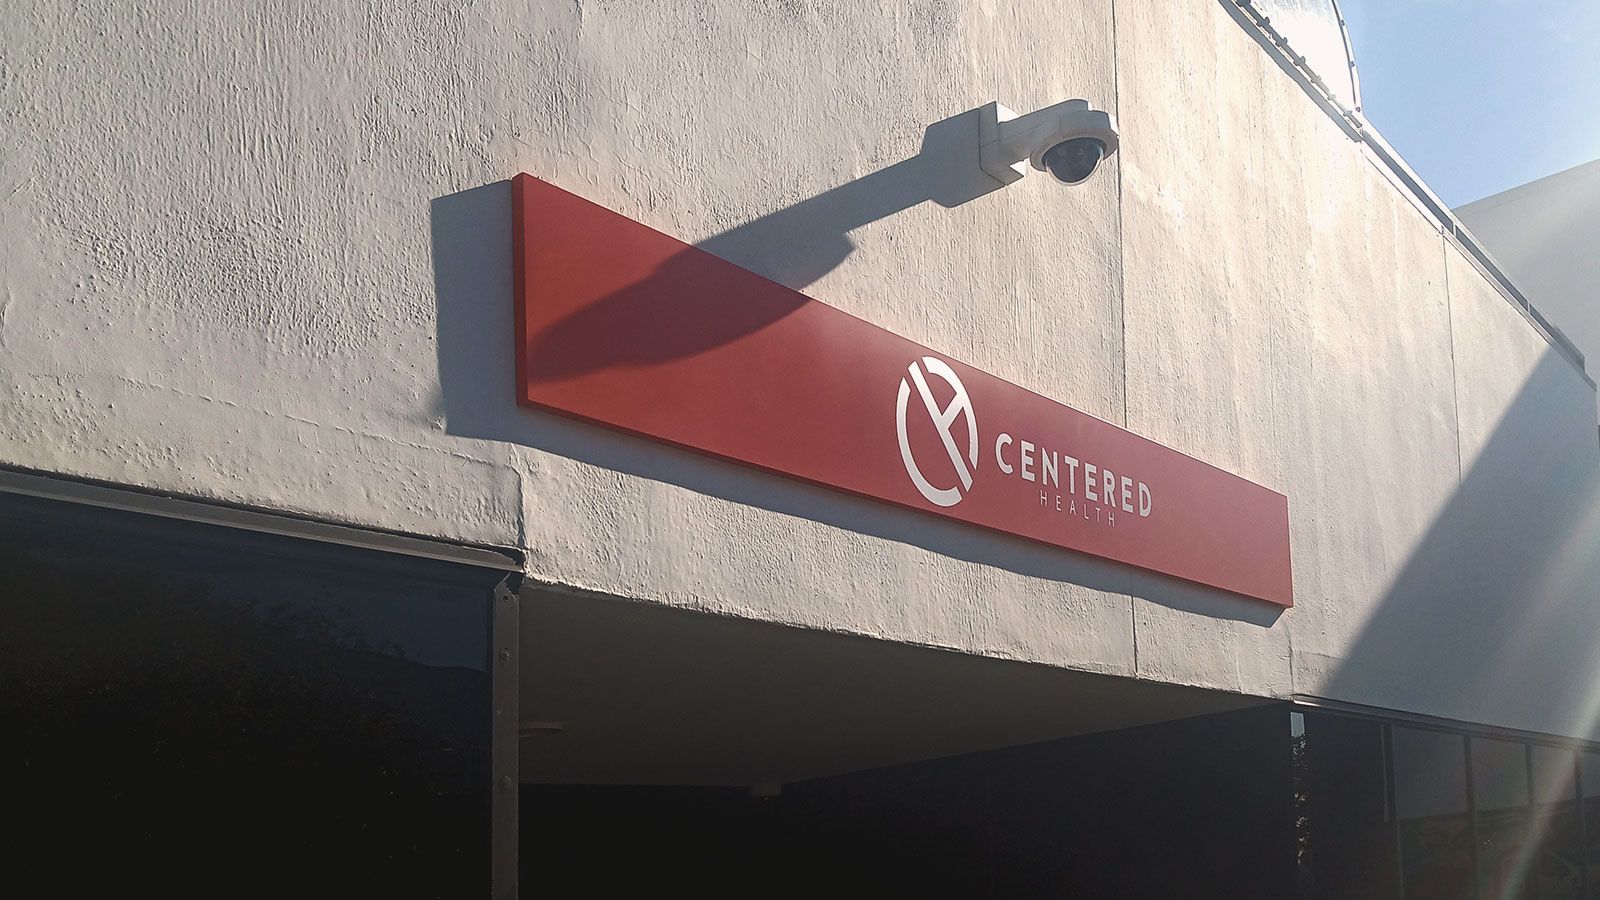 Centered health building sign